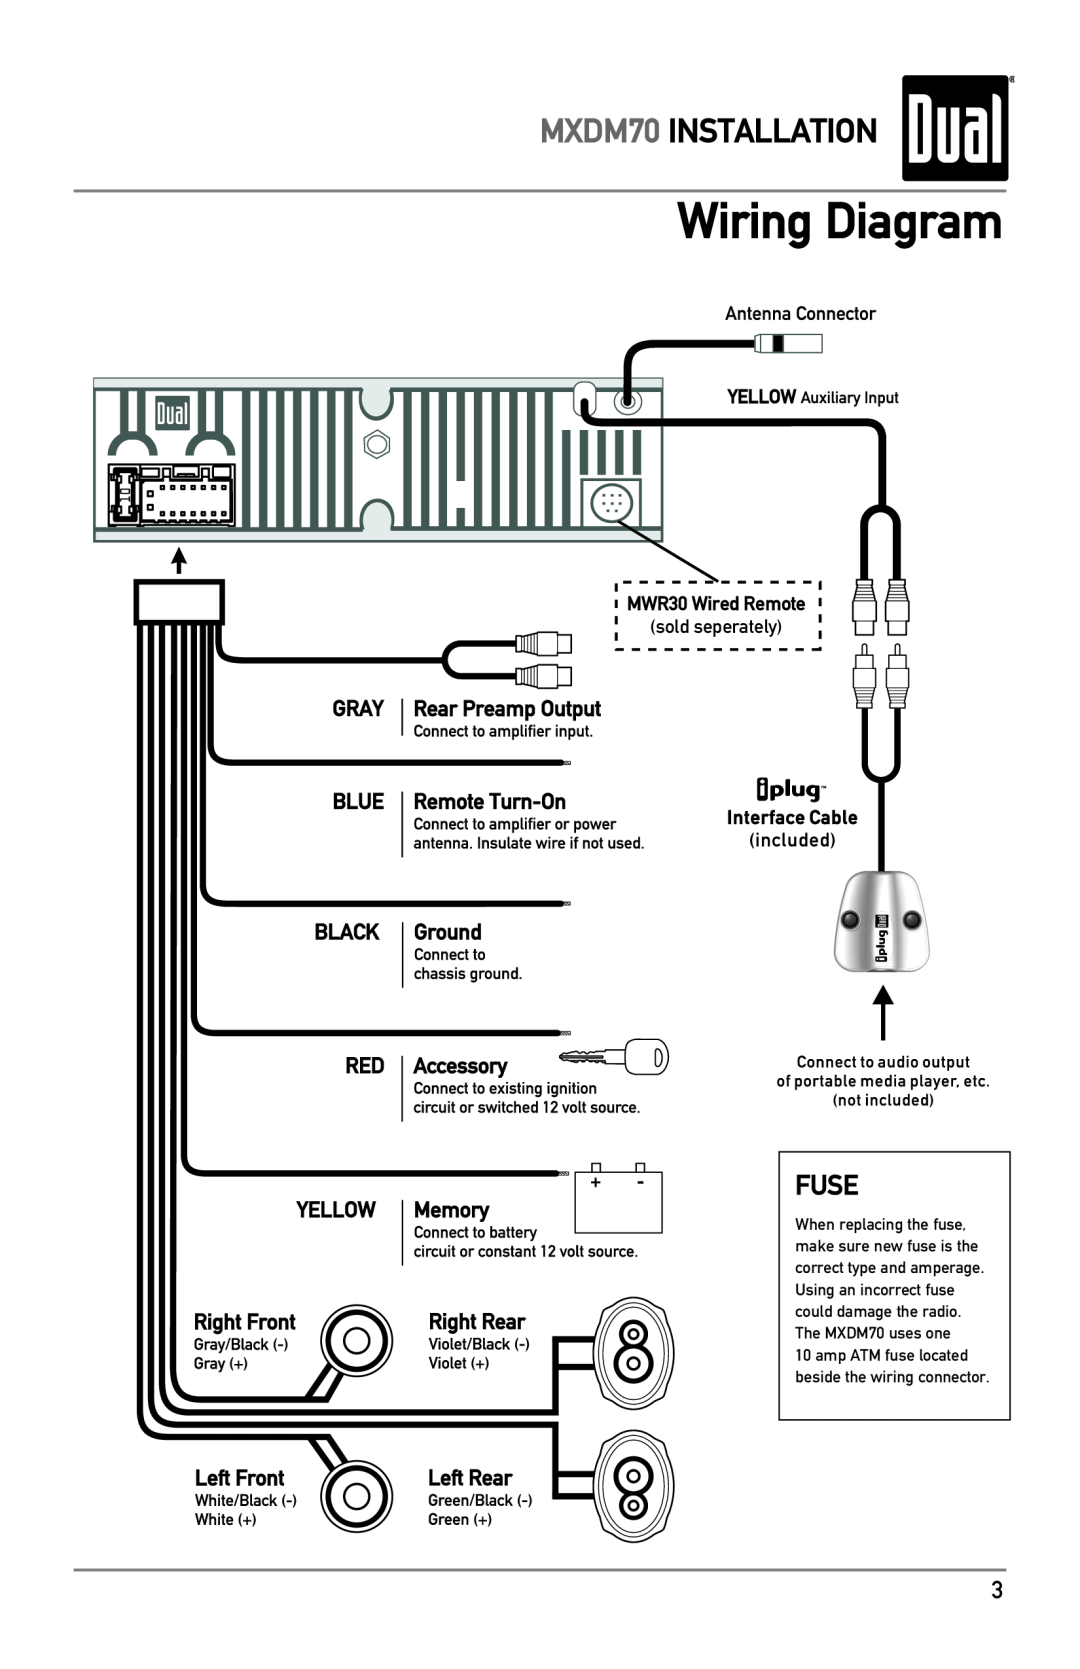 Dual Wiring Diagram, Fuse, MXDM70 INSTALLATION, MWR30 Wired Remote, amp ATM fuse located beside the wiring connector 